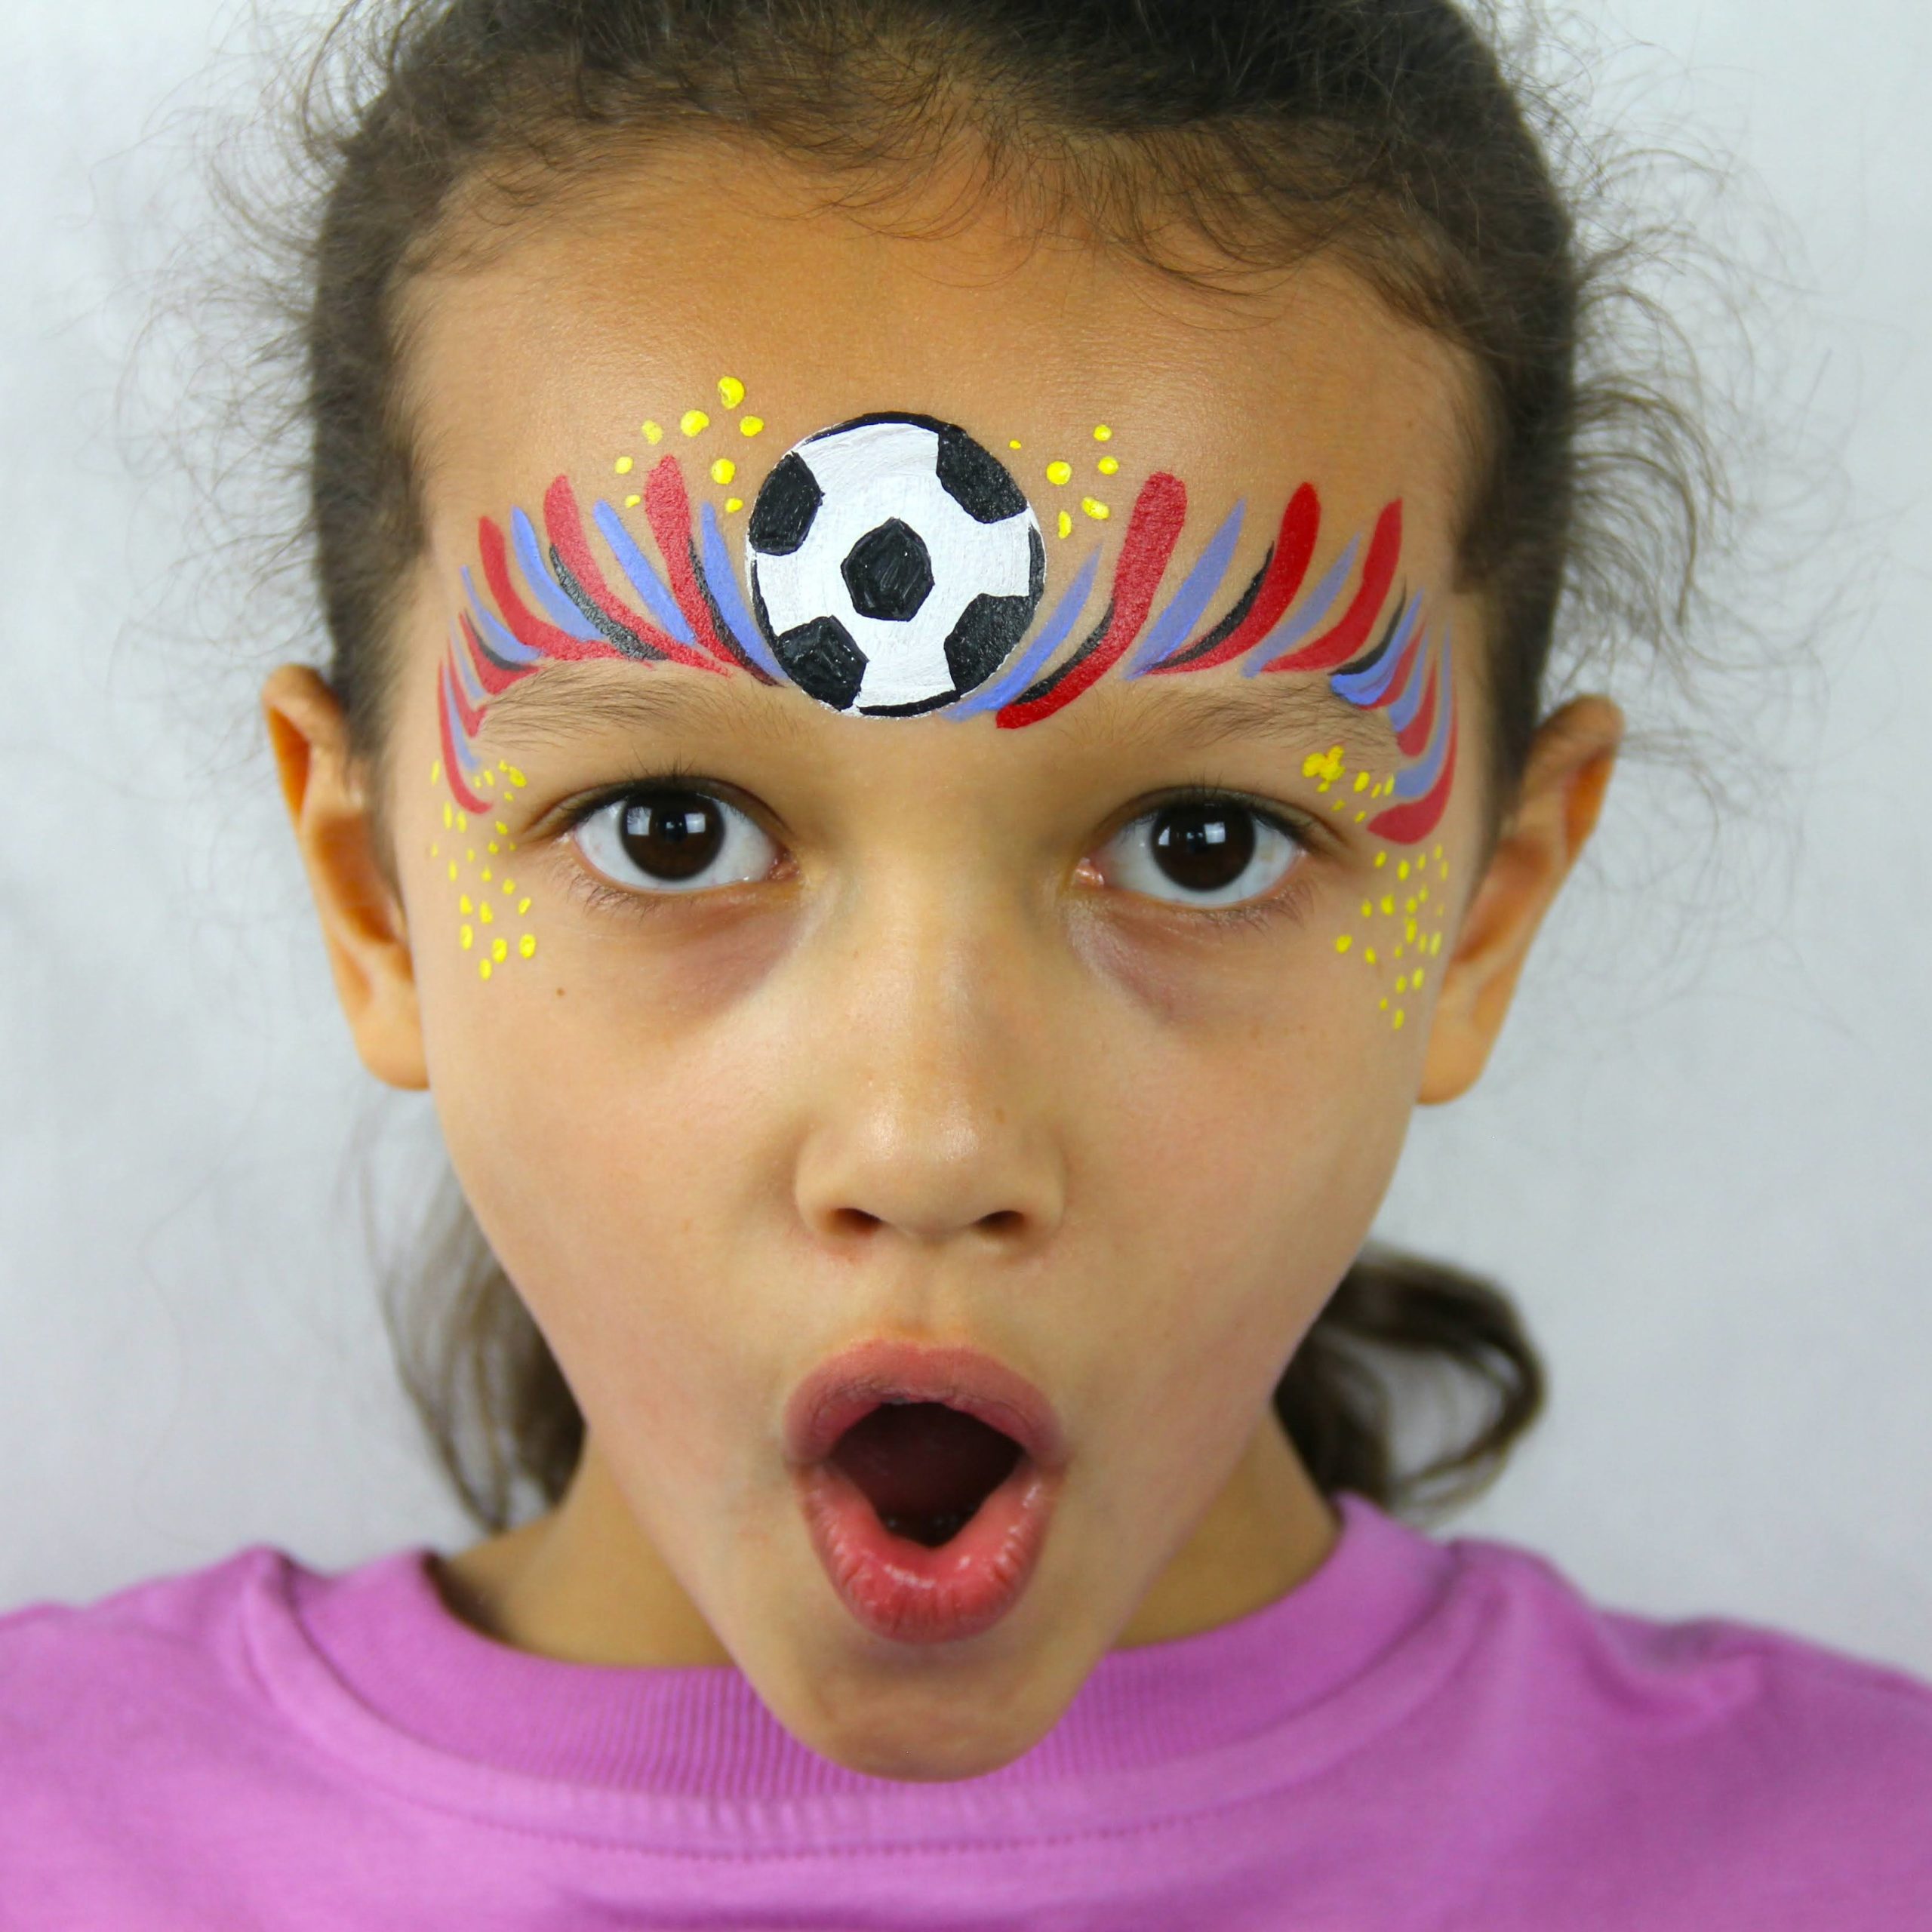 soccerball face painting